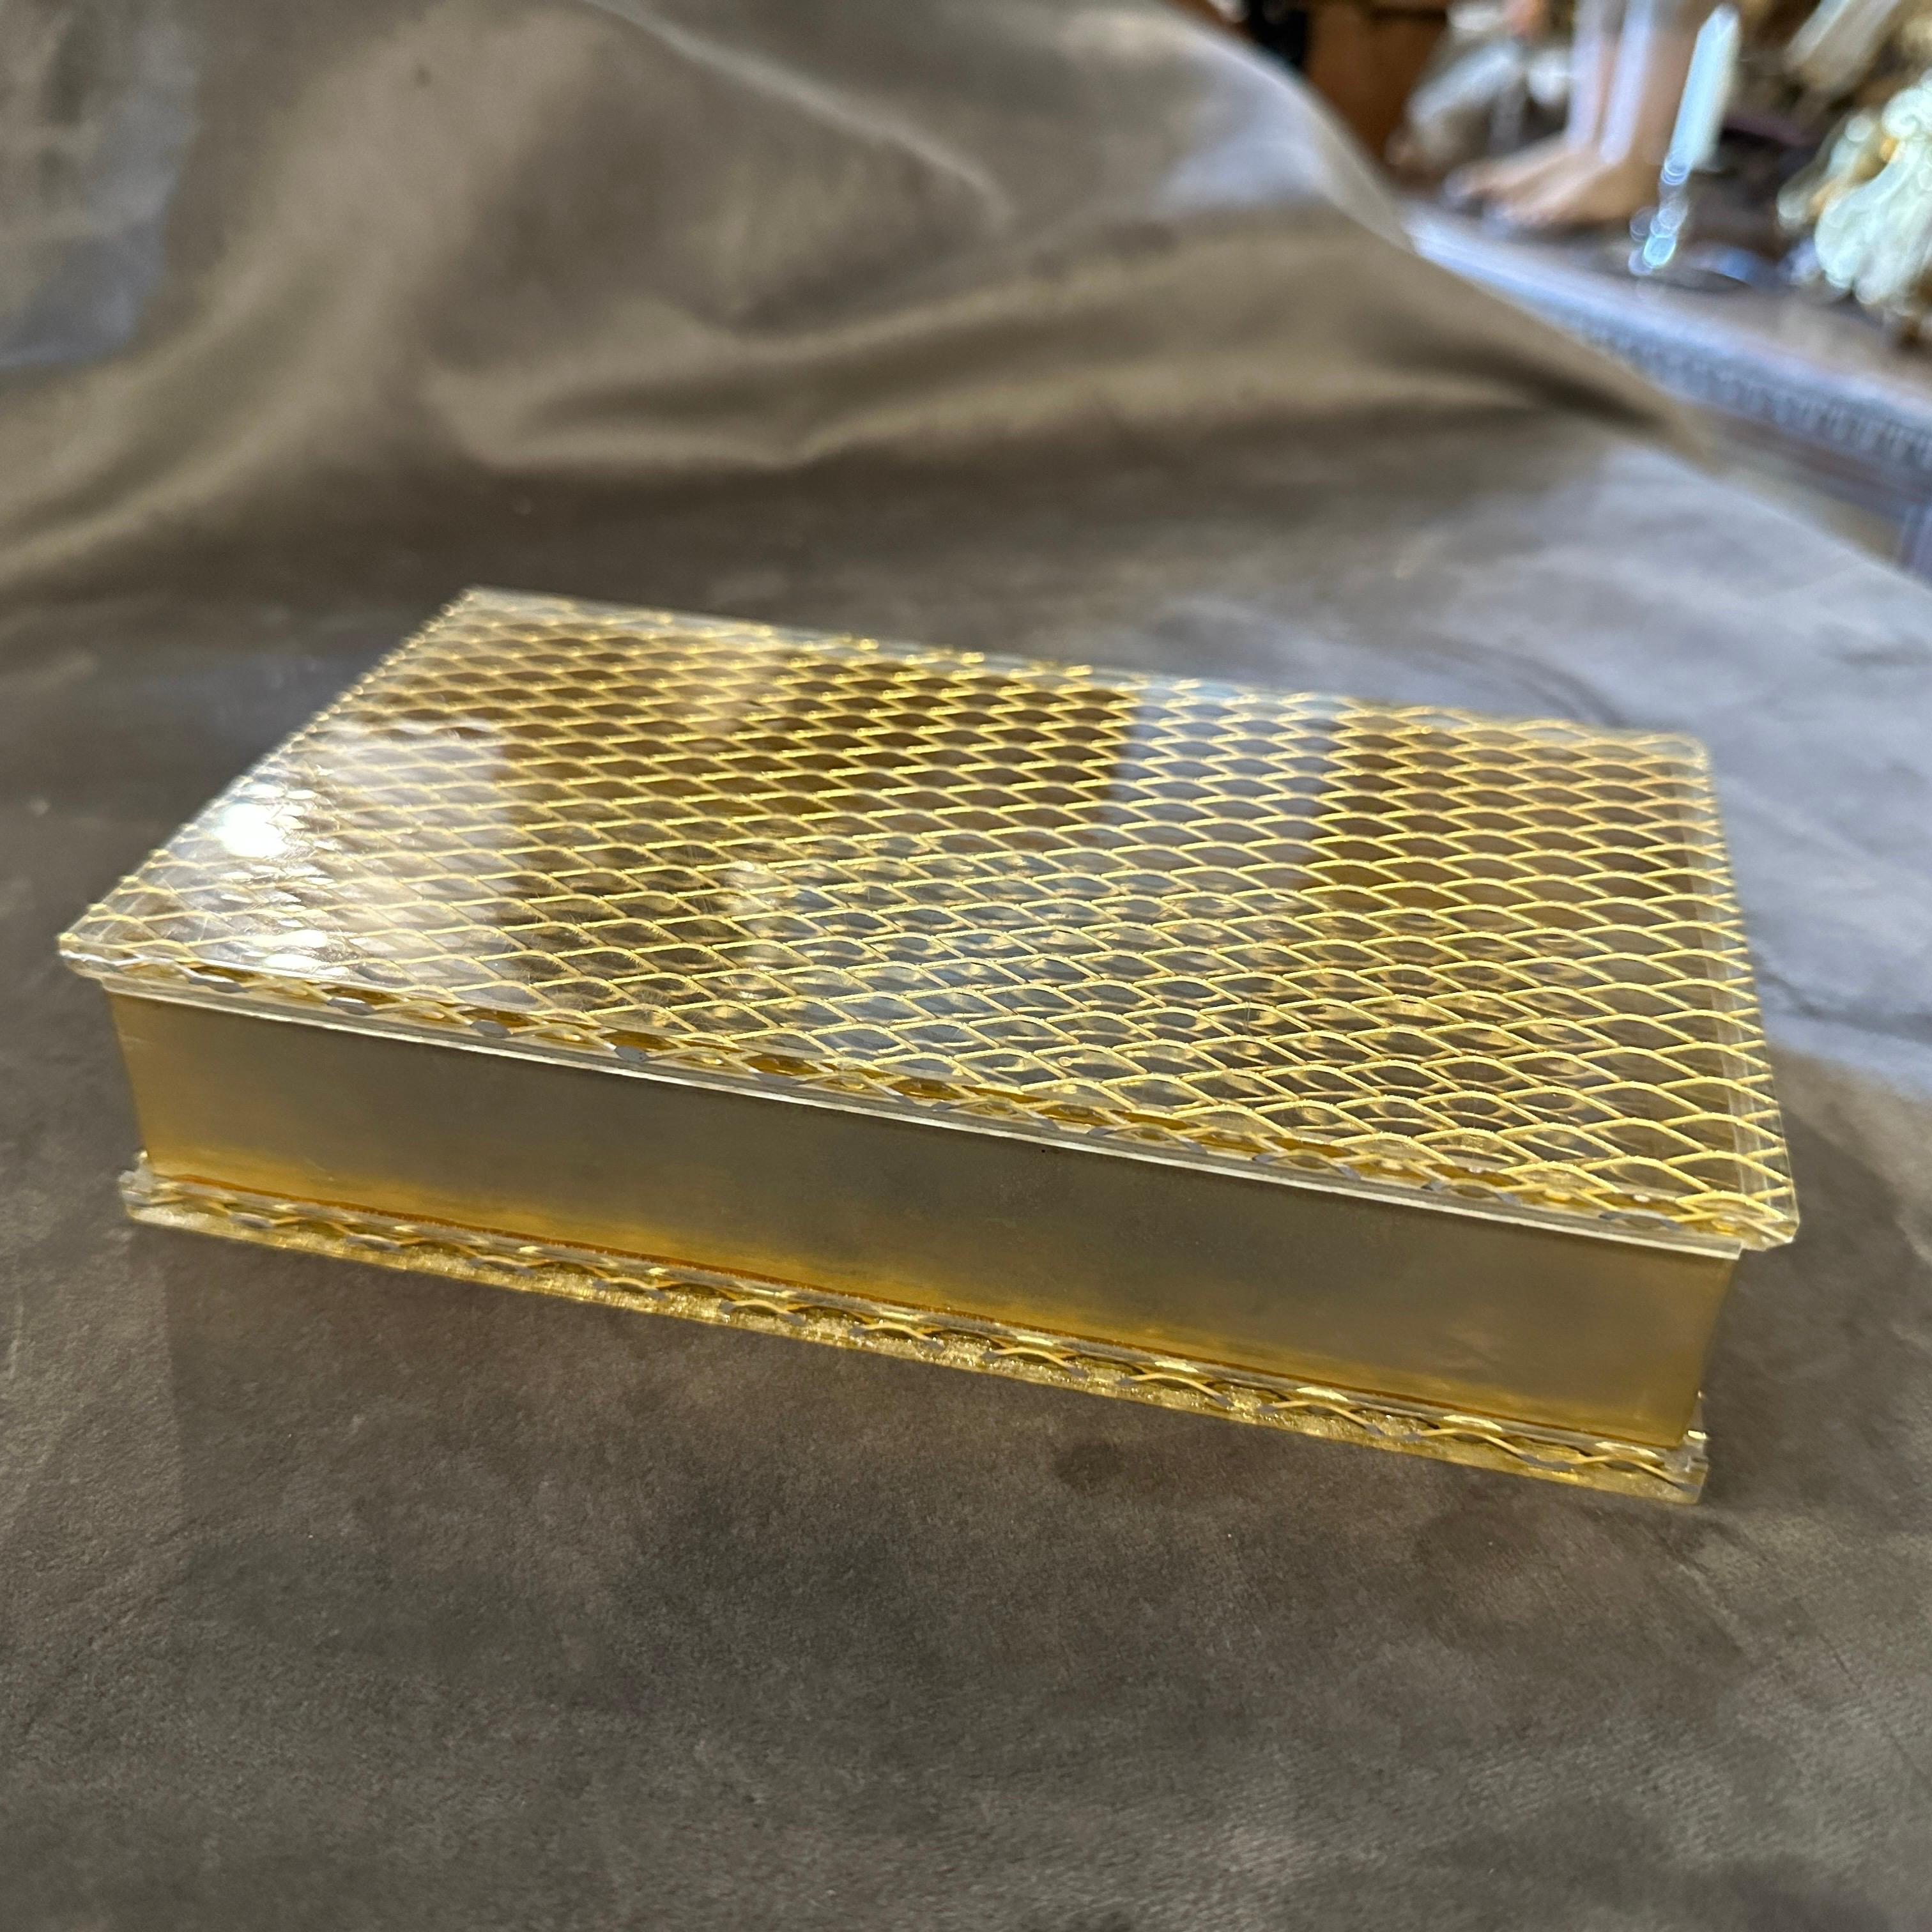 An elegant brass and plexiglass designed and manufactured in Italy in the Eighties, it's in lovely condition. the jewelry box is characterized by use of high-quality materials, geometric design, brass detailing, plexiglass transparency, interior